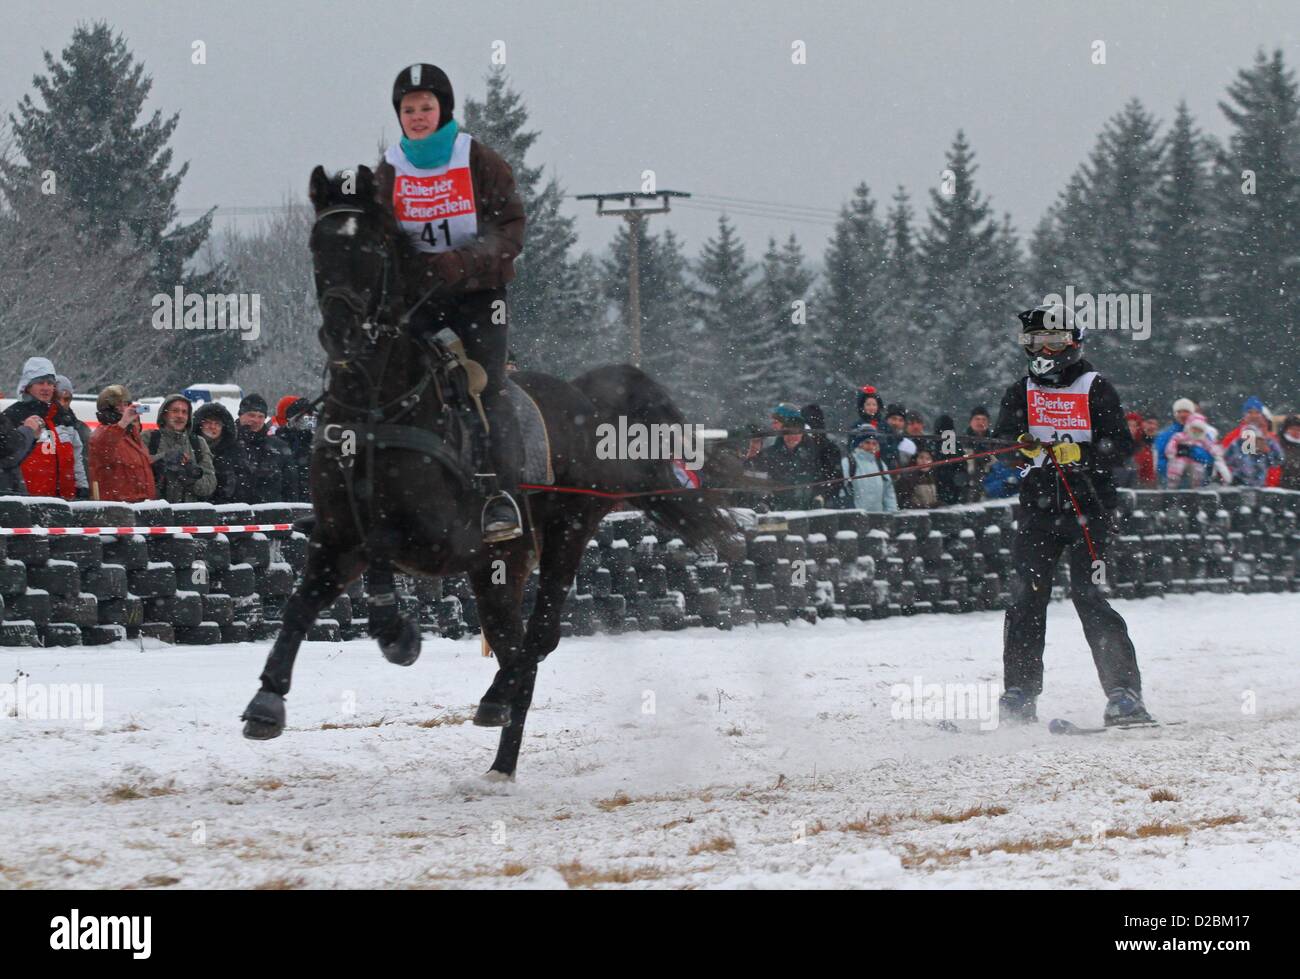 Equestrian Rosemarie Wesarg rides on her horse as she pulls her teammate Mario Suppe (R) across an obstacle course in Elend, Germany, 19 January 2013. More than 100 contestants particiapate in this curious race which is based on a Scandinavian winter sports concept. Skiers are being pulled across an obstacle course either with animals or motorised vehicles. Photo: Matthias Bein Stock Photo